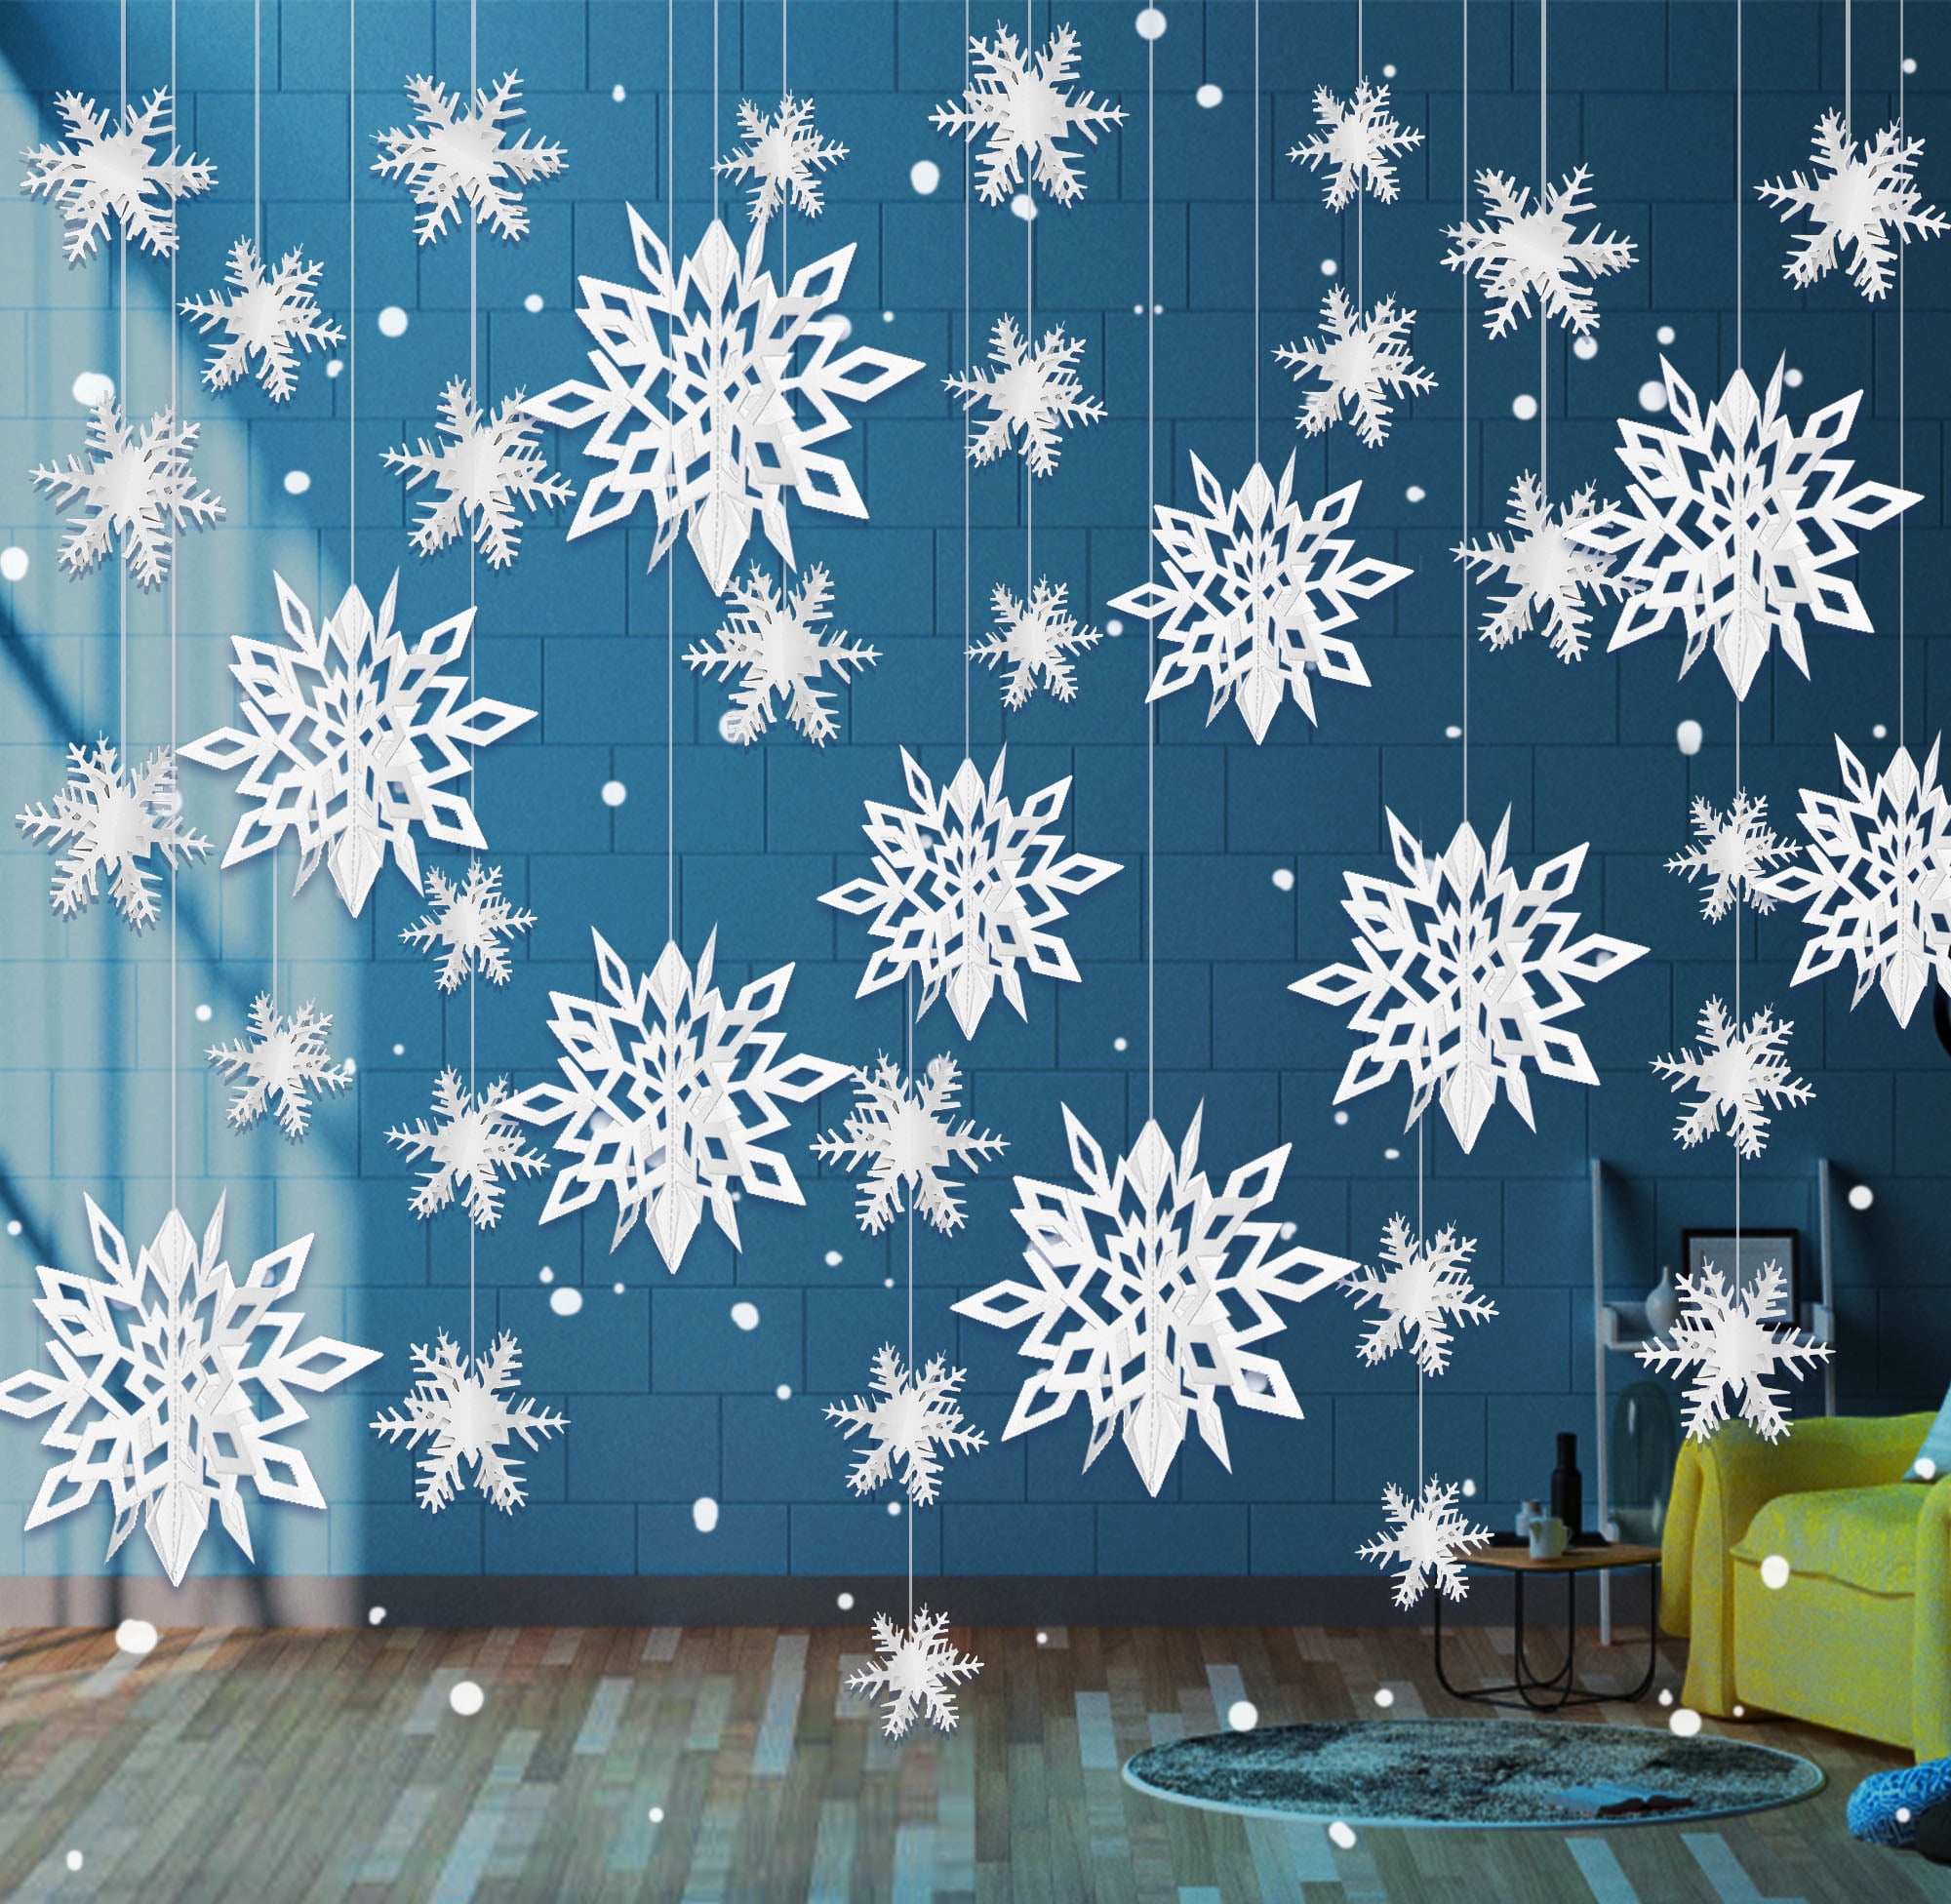 White Snow Flakes Hanging on Strings Stock Vector - Illustration